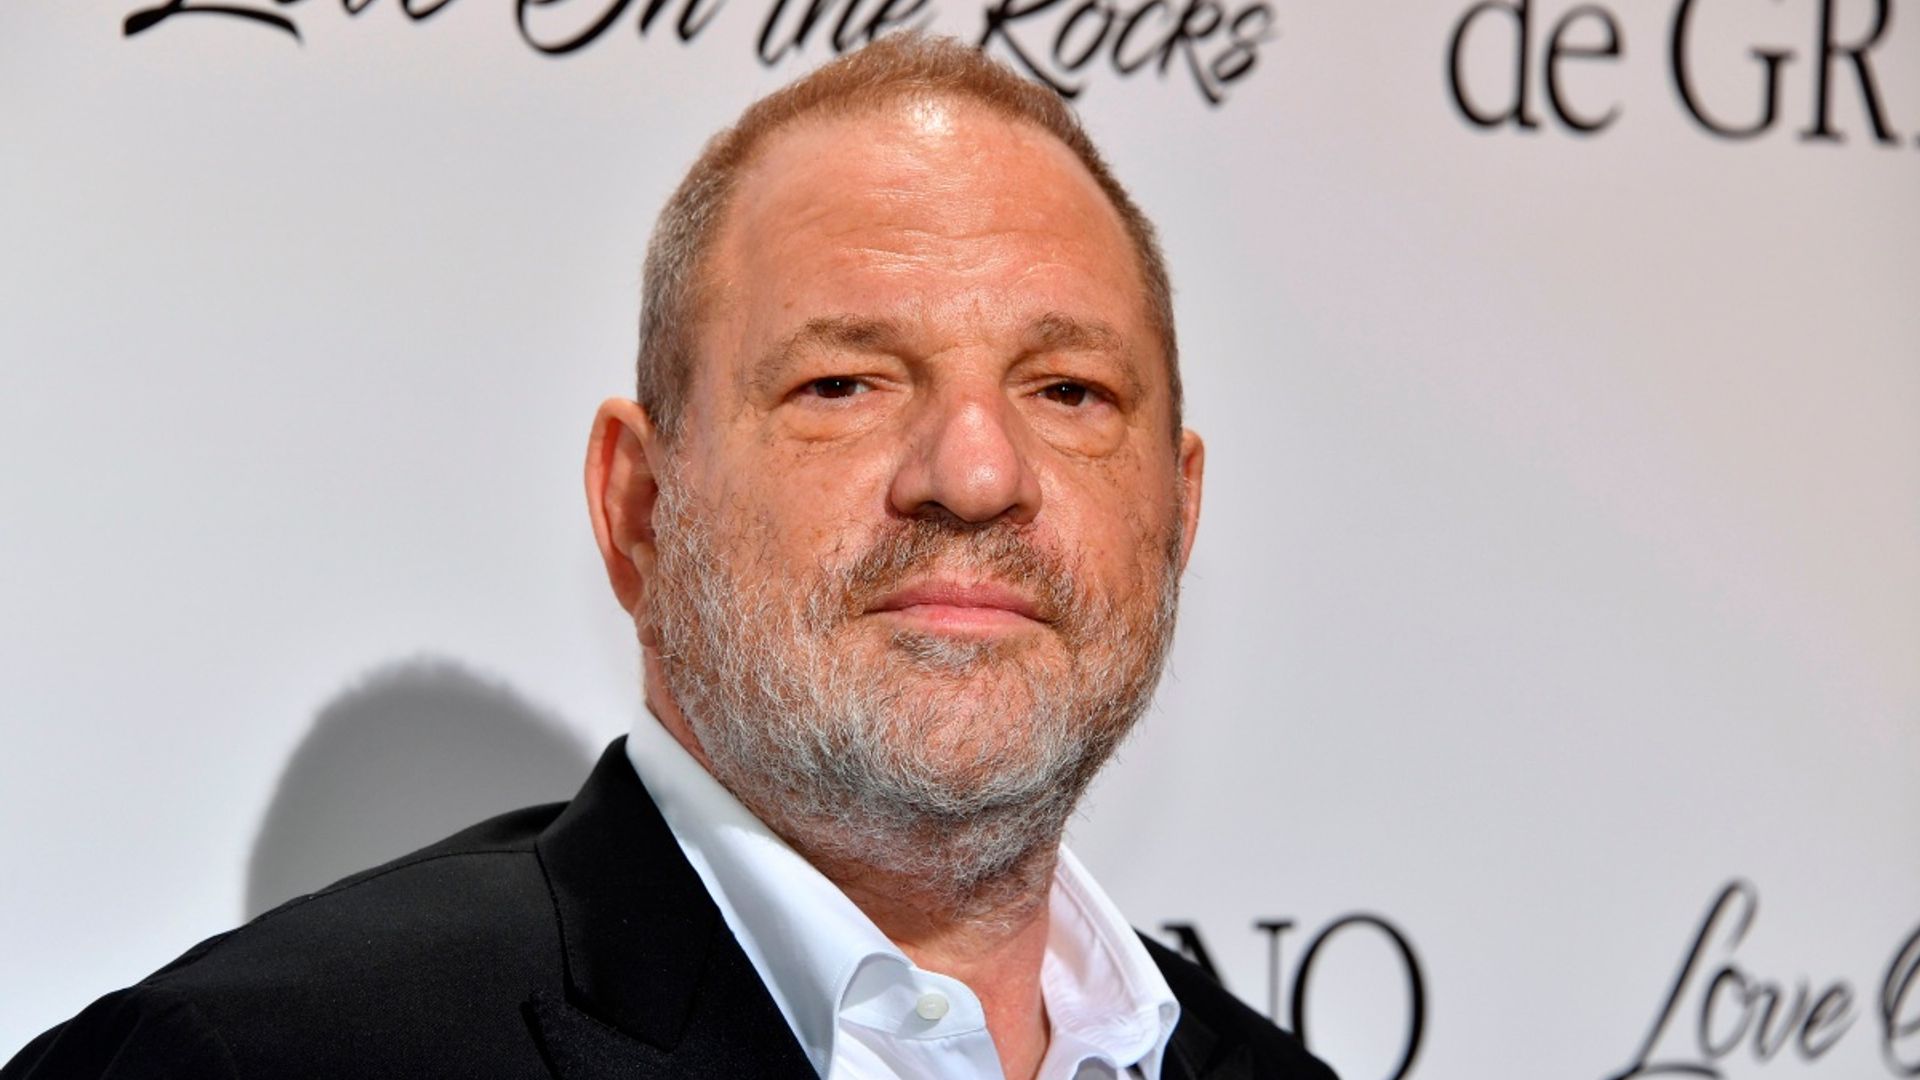 Hollywood mogul Harvey Weinstein found guilty of sexual assault 